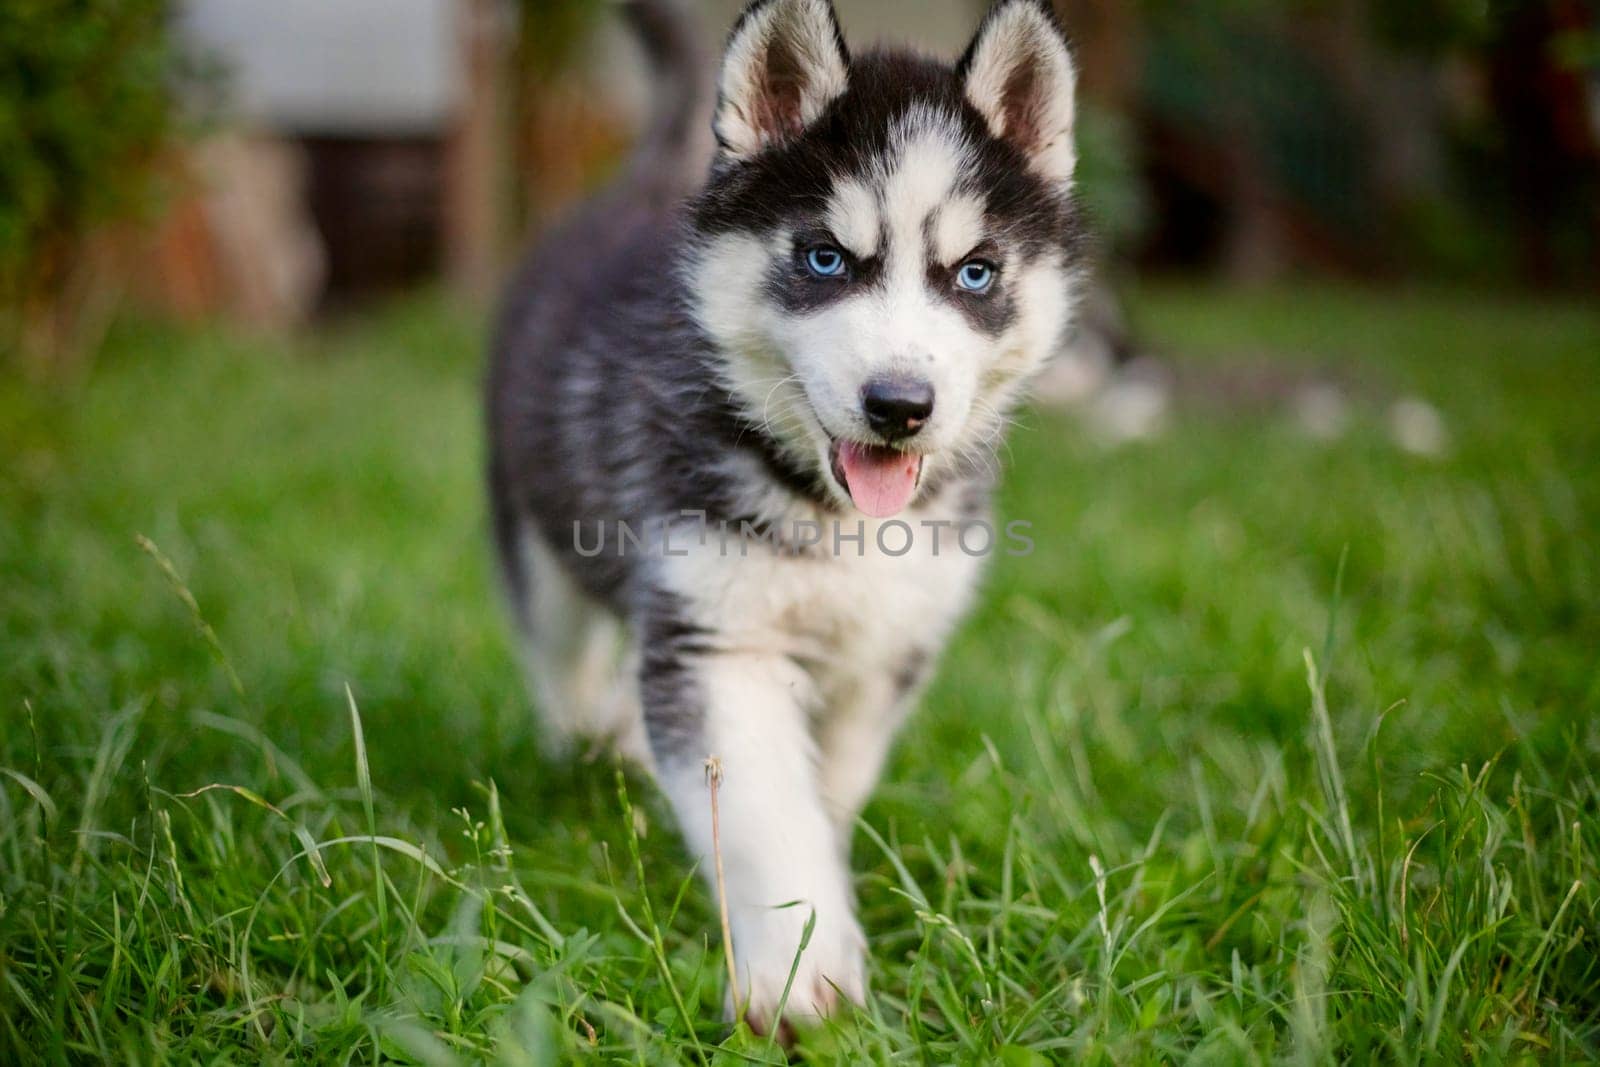 Siberian Husky puppy with blue eyes playing in green grass. Pet portrait for design and print.